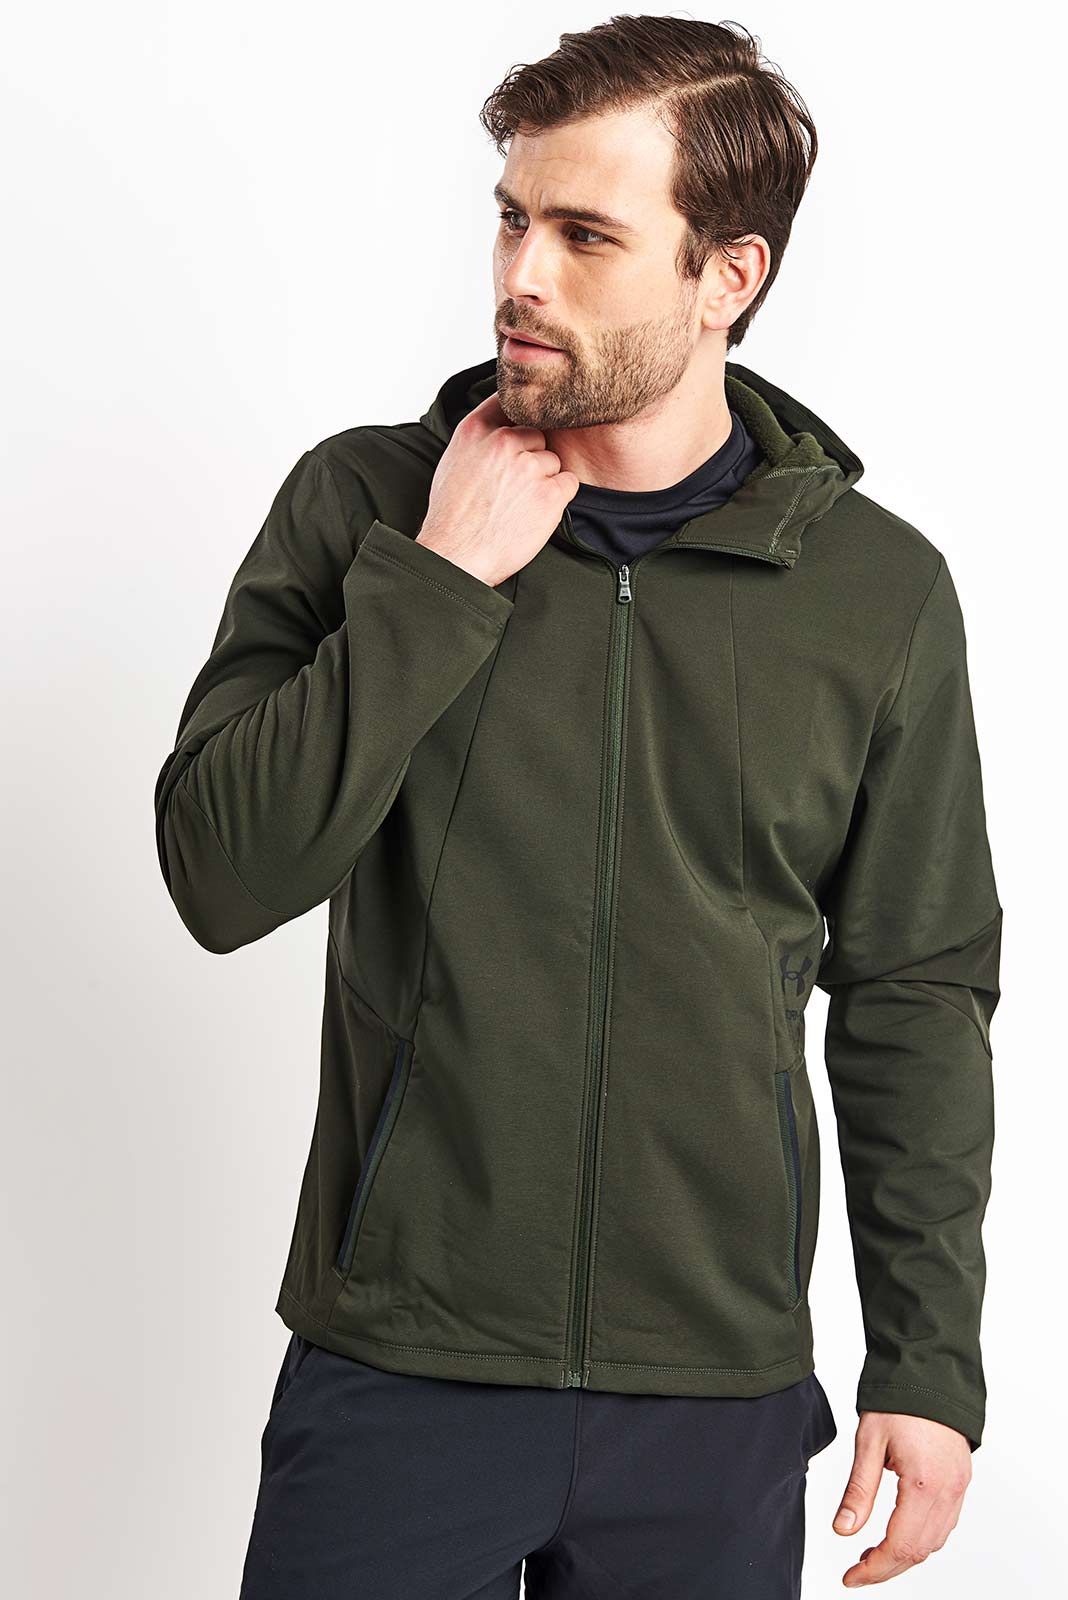 Under Armour Hooded Jacket | Harrods ID